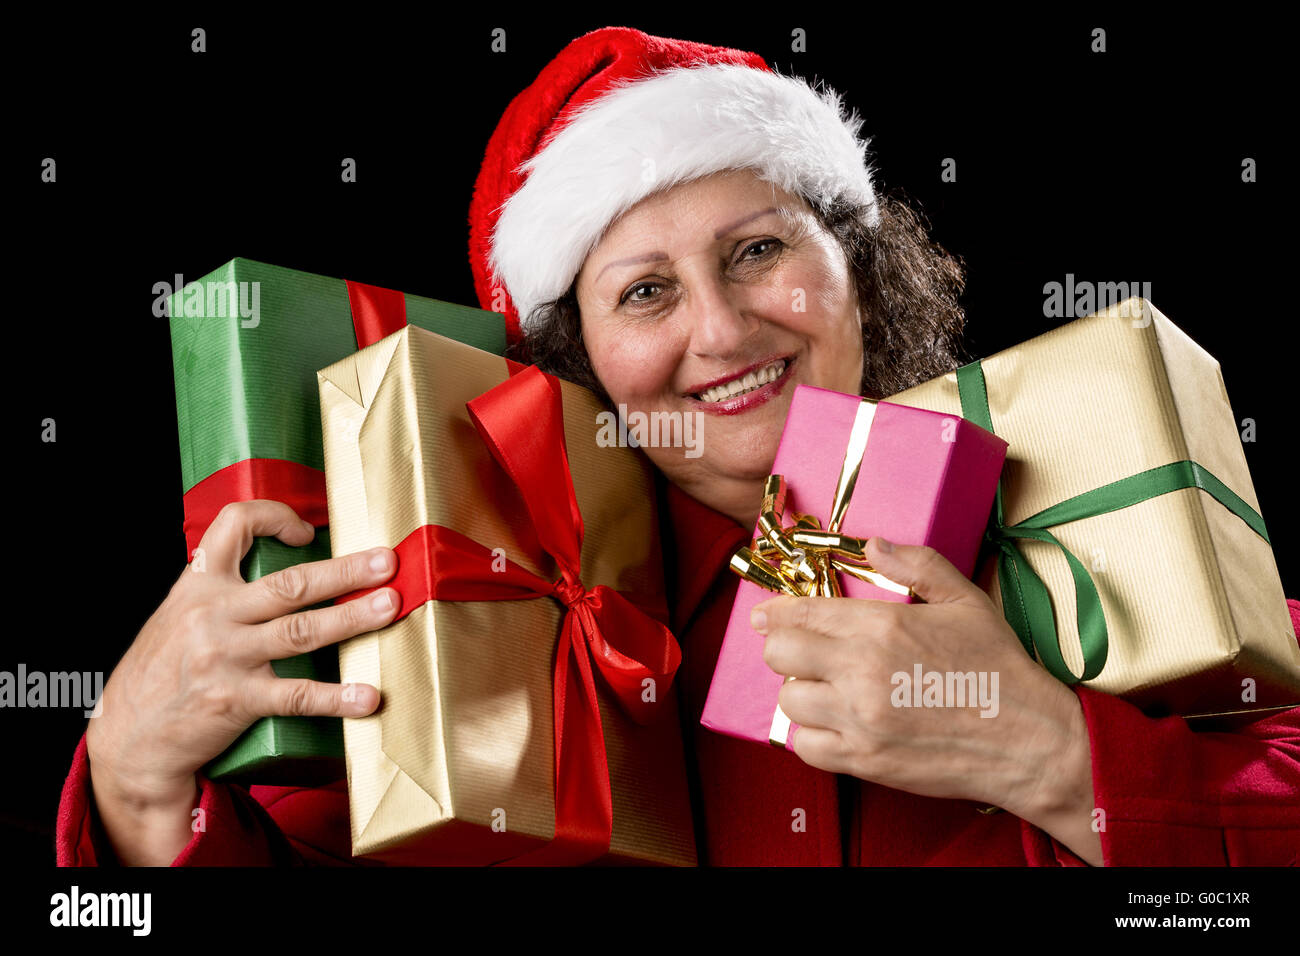 Smiling Aged Woman Embracing Four Wrapped Gifts Stock Photo